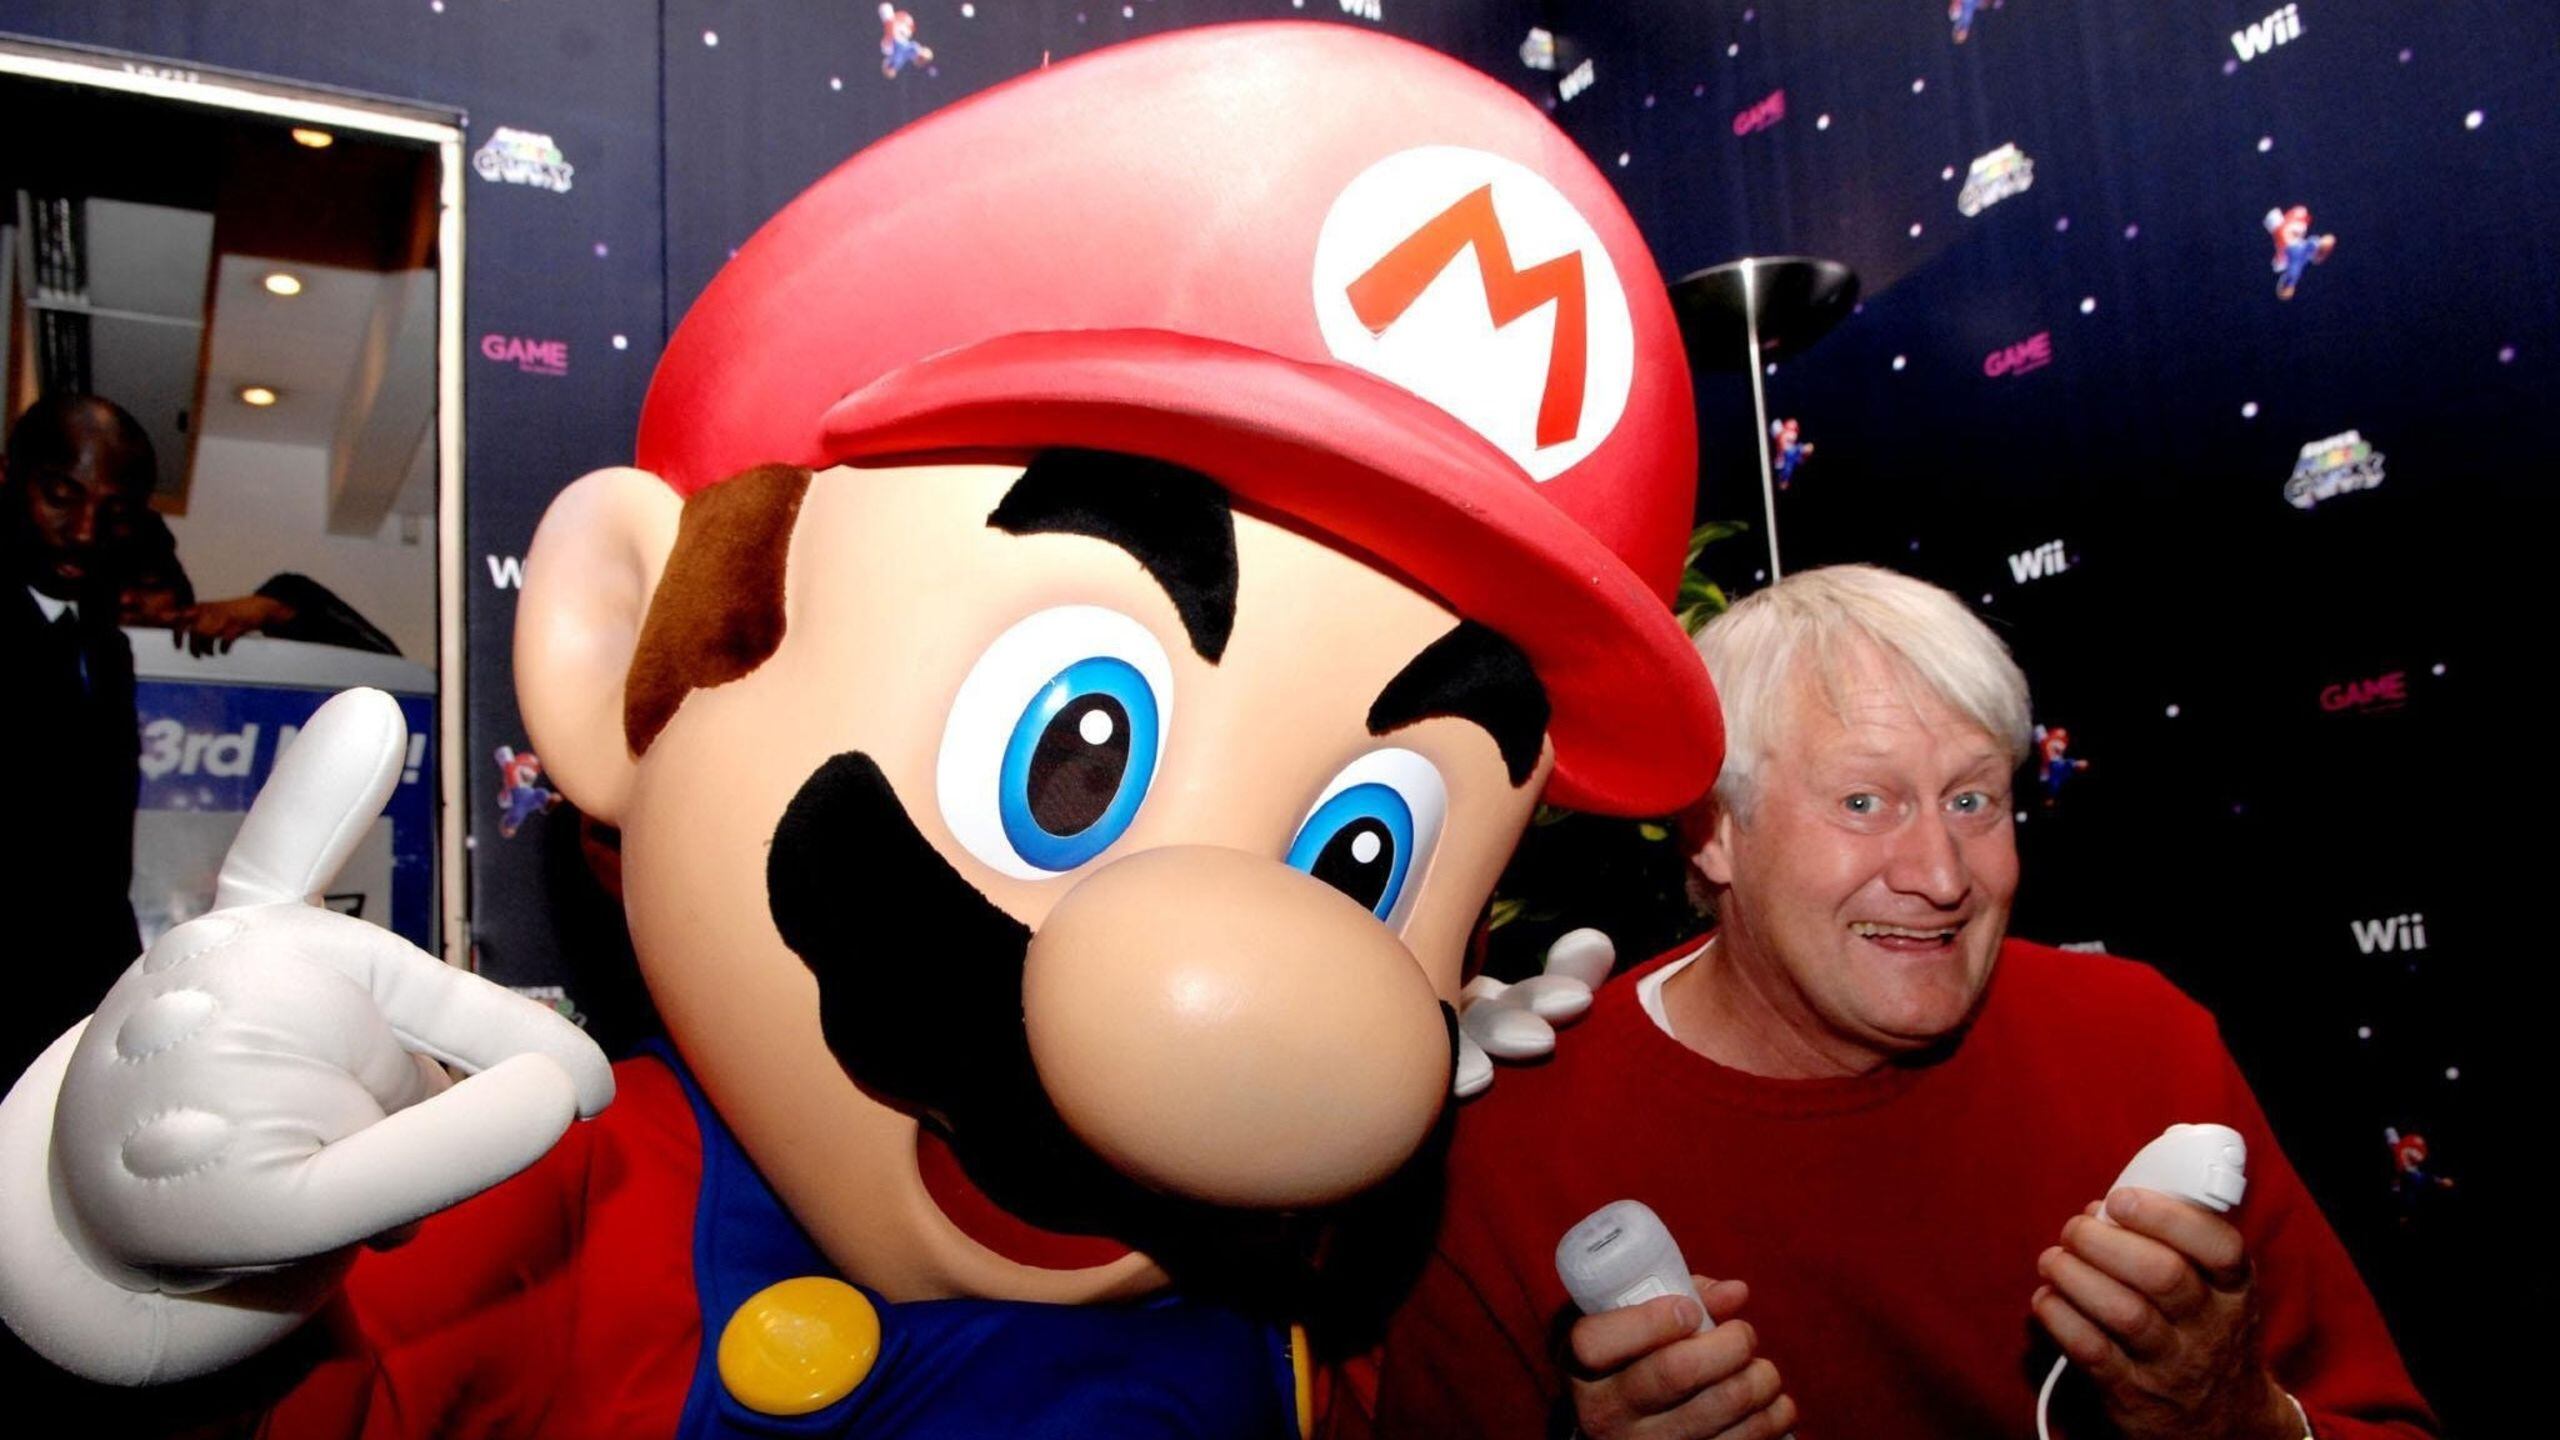 Nintendo has edited the gaming star’s official profile with new job history information.